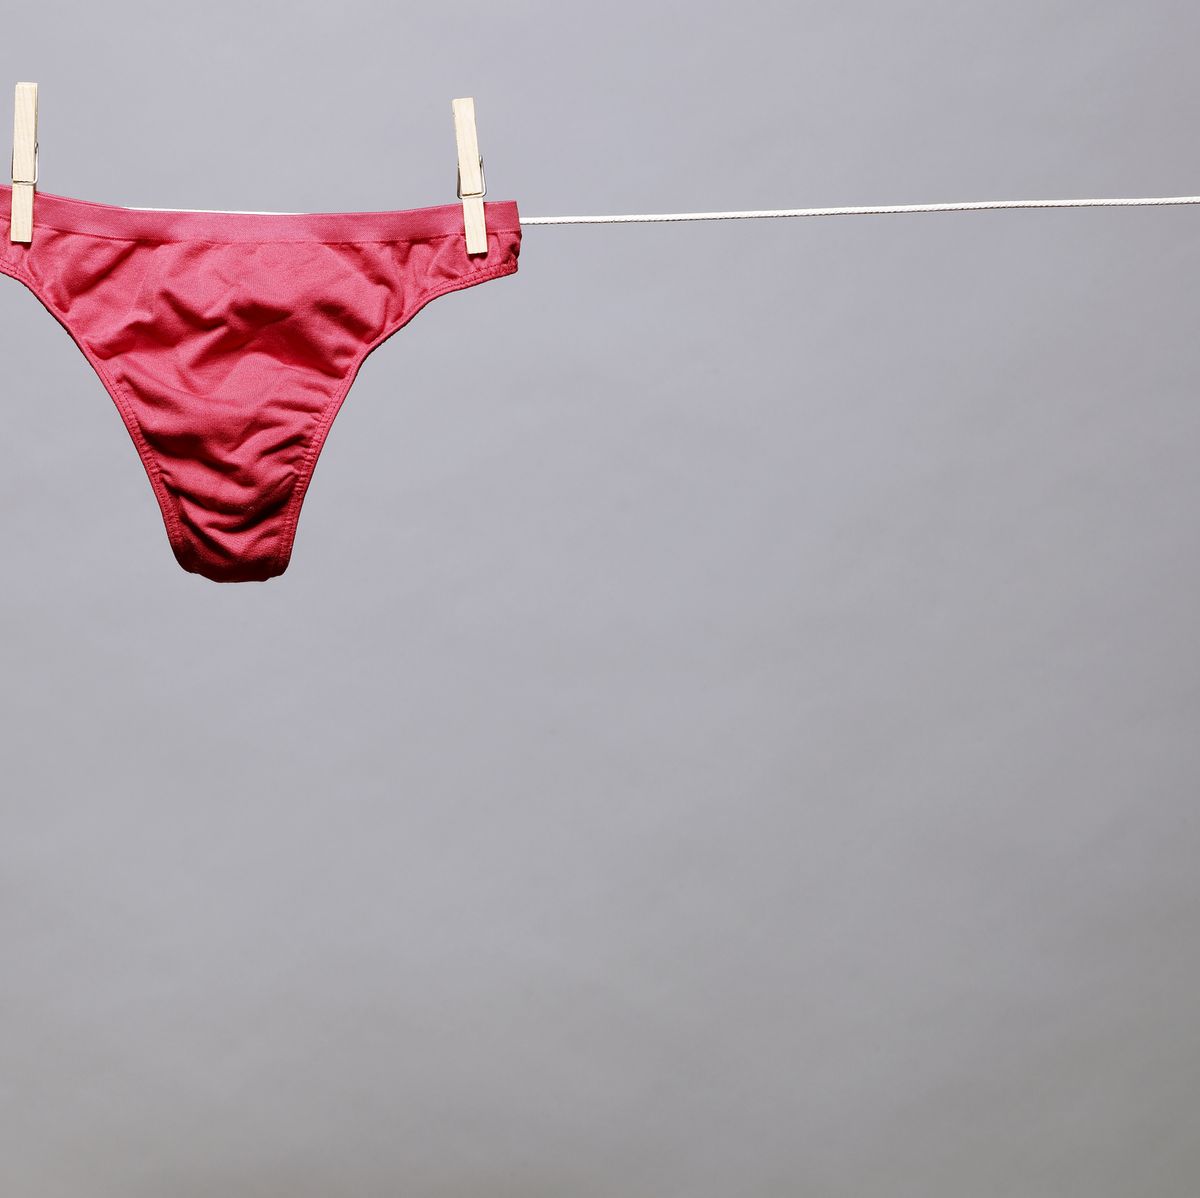 Woman Asks If It's Wrong To Walk Around In Underwear When Her